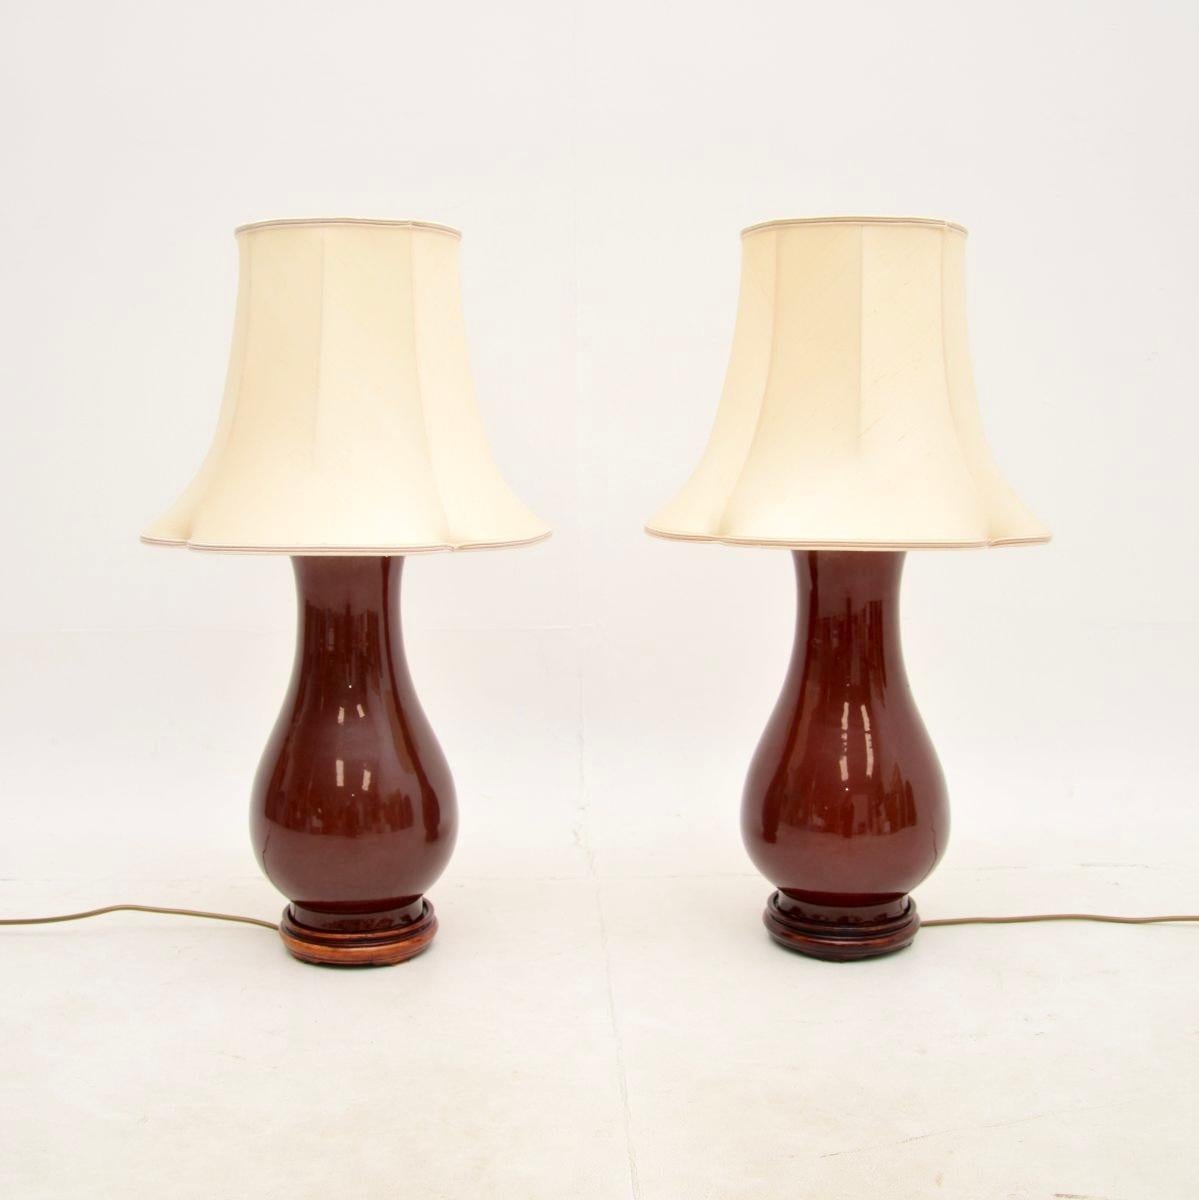 A fantastic pair of antique oriental style ceramic table lamps. They were made in England, they date from around the 1970’s.

The quality is outstanding, the are a large and impressive size. We have paired them with a gorgeous pair of vintage silk